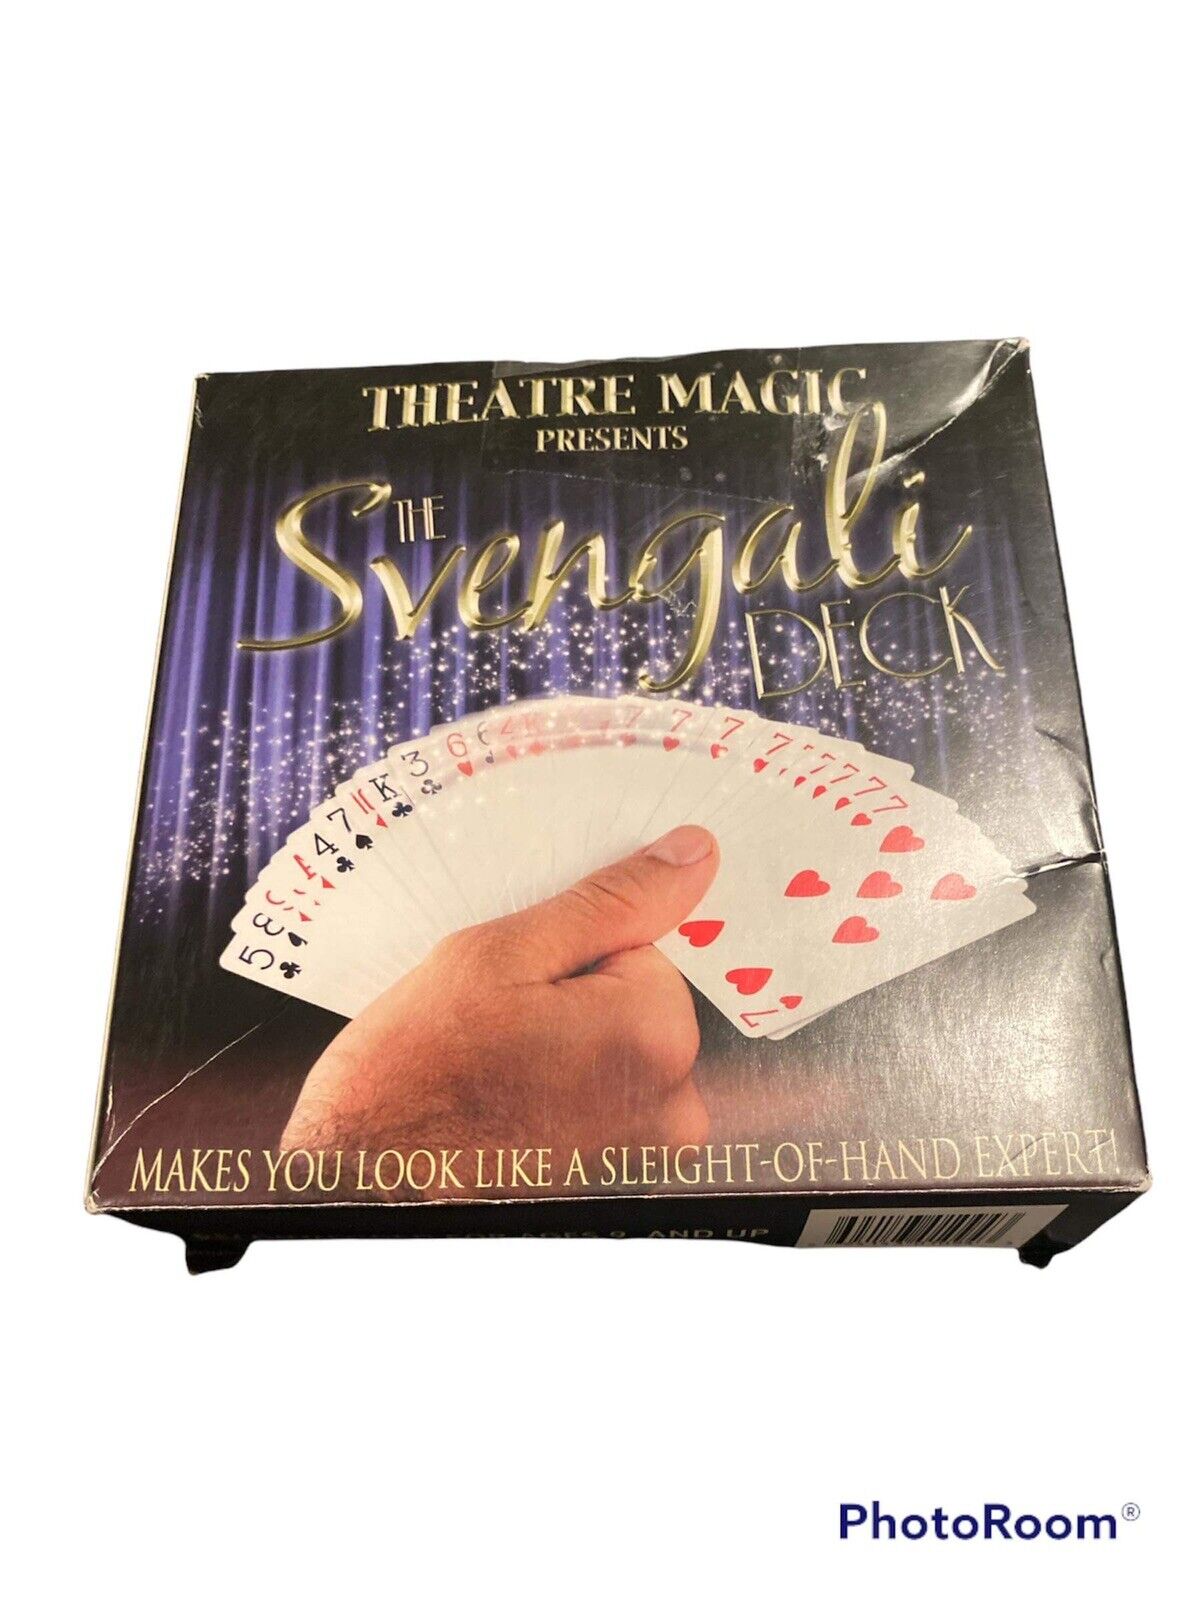 Theatre Magic Presents New THE SVENGALI DECK With Instructional DVD